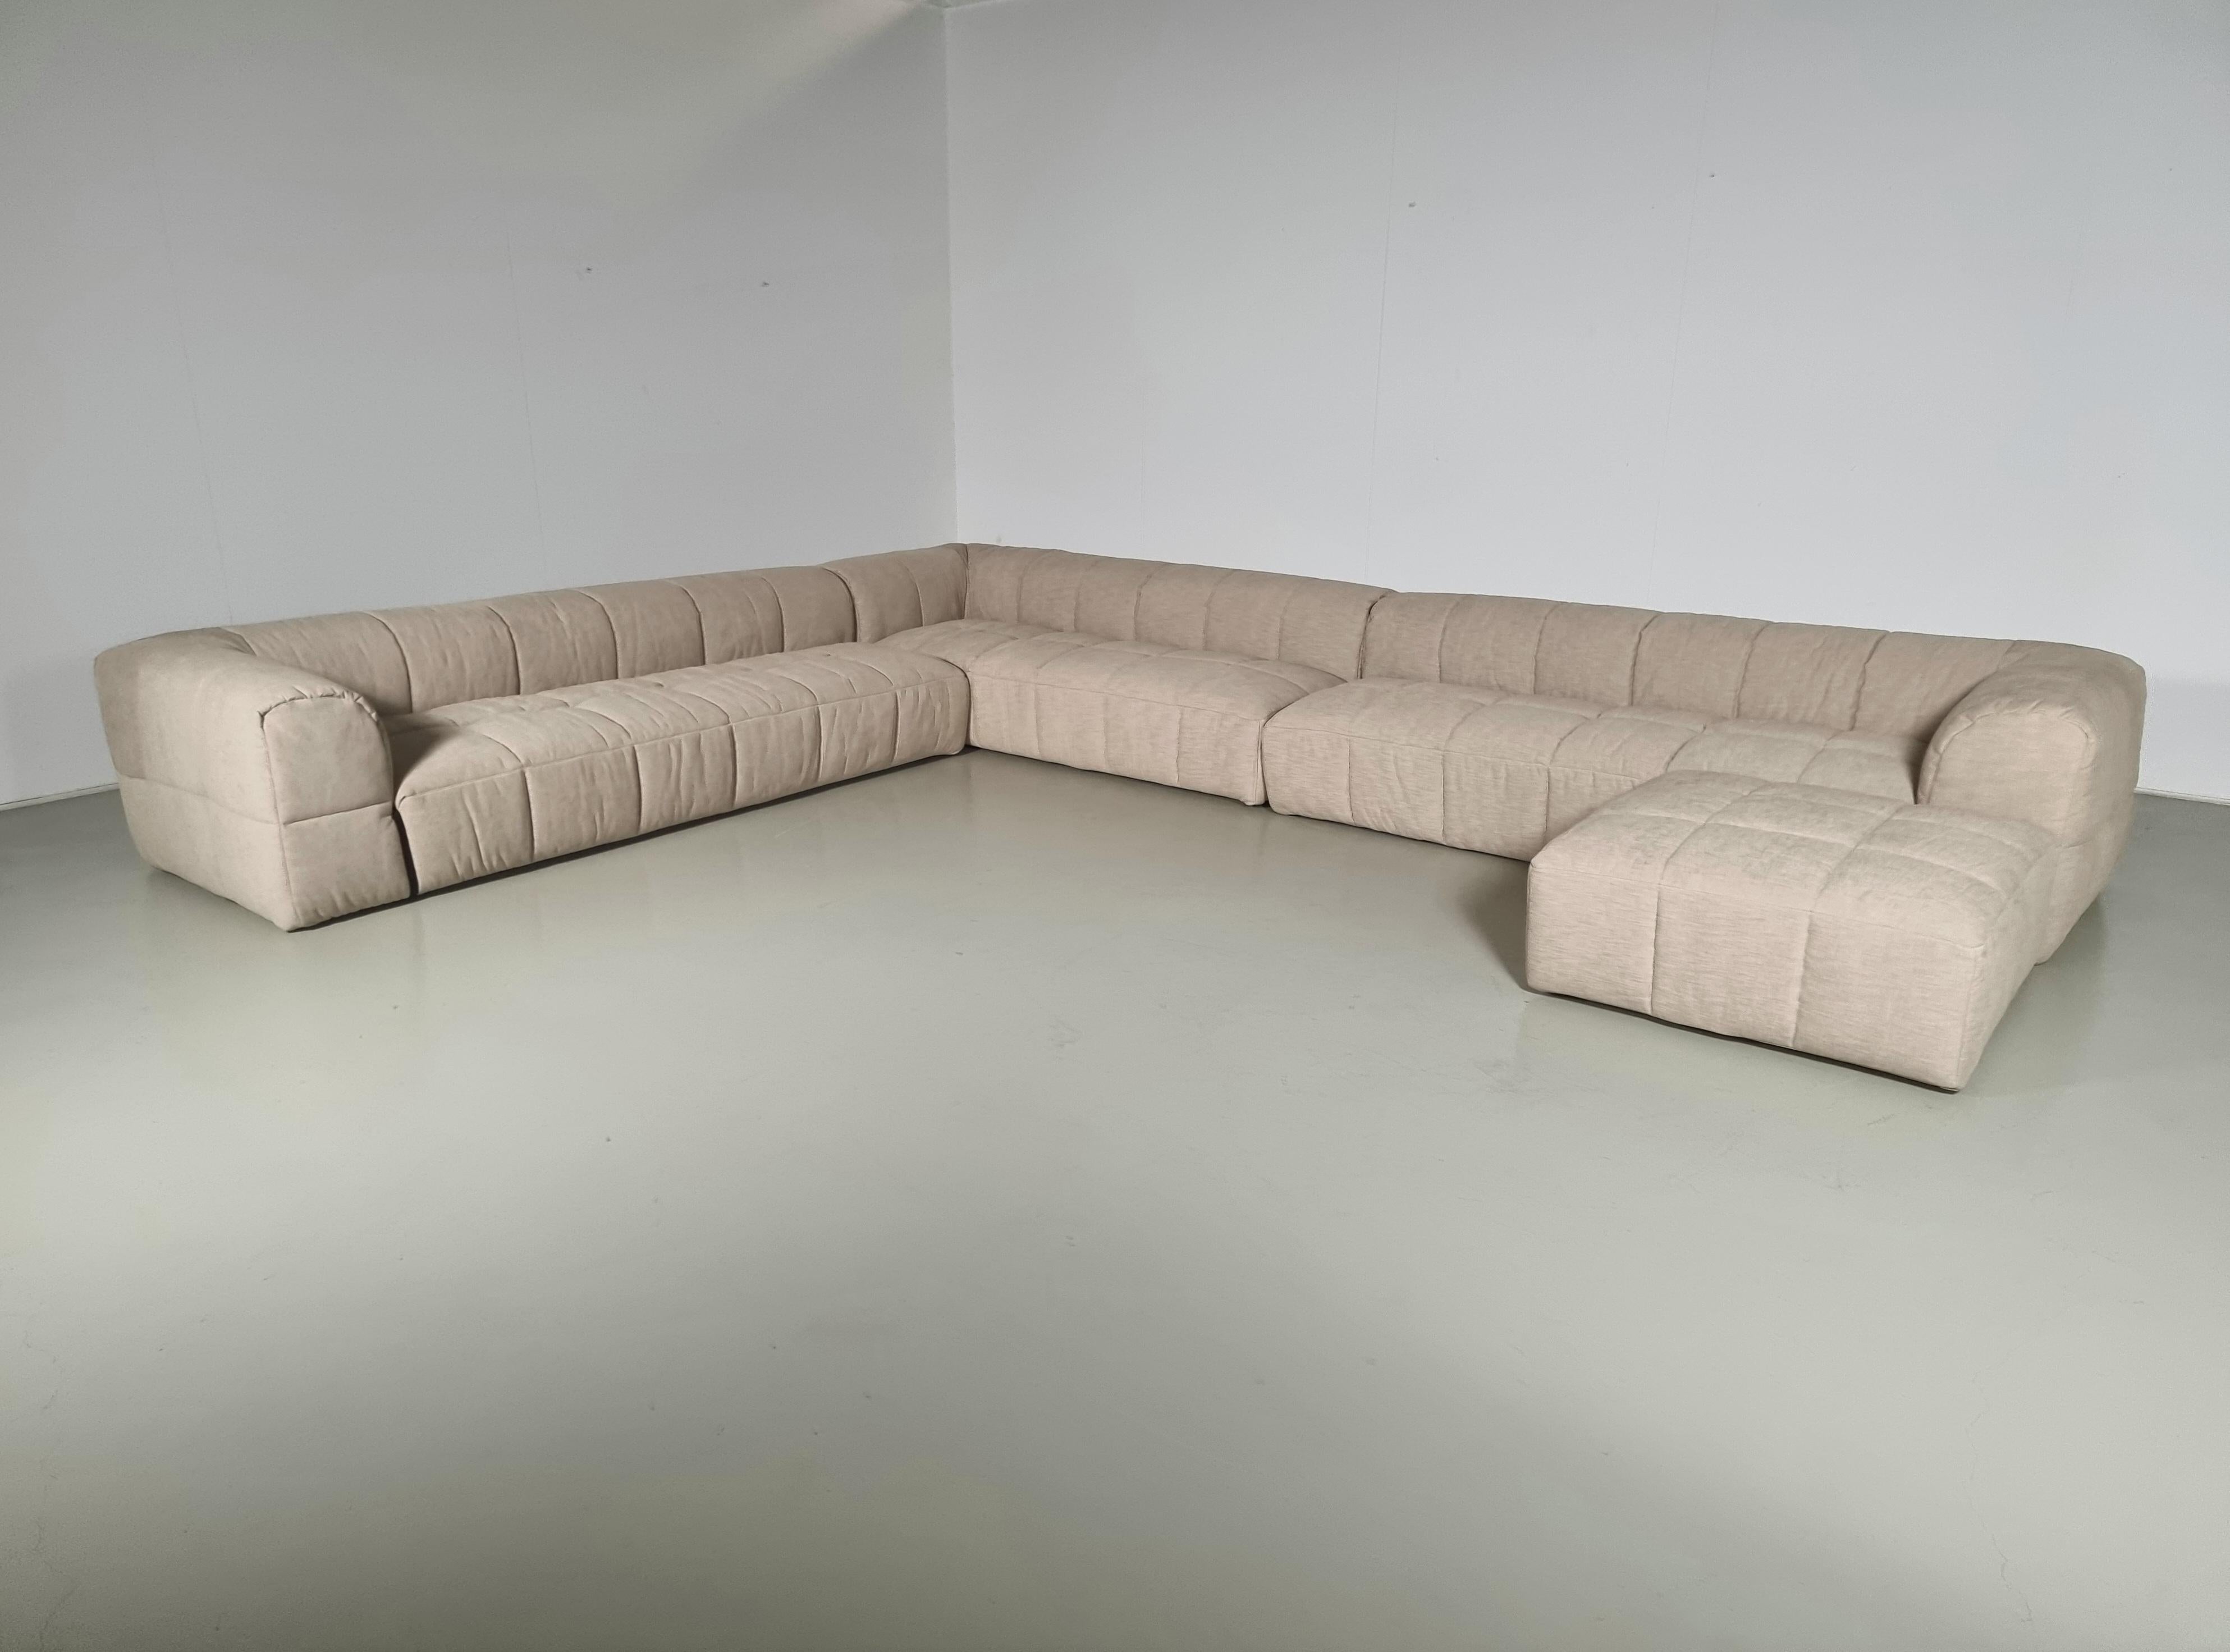 Huge Strips sofa designed by Cini Boeri for Arflex in the late 1960s. One of the most famous products of Arflex. Designed in 1968, it was awarded the price Compasso d’Oro and it is displayed in several museums around the world, like for example the